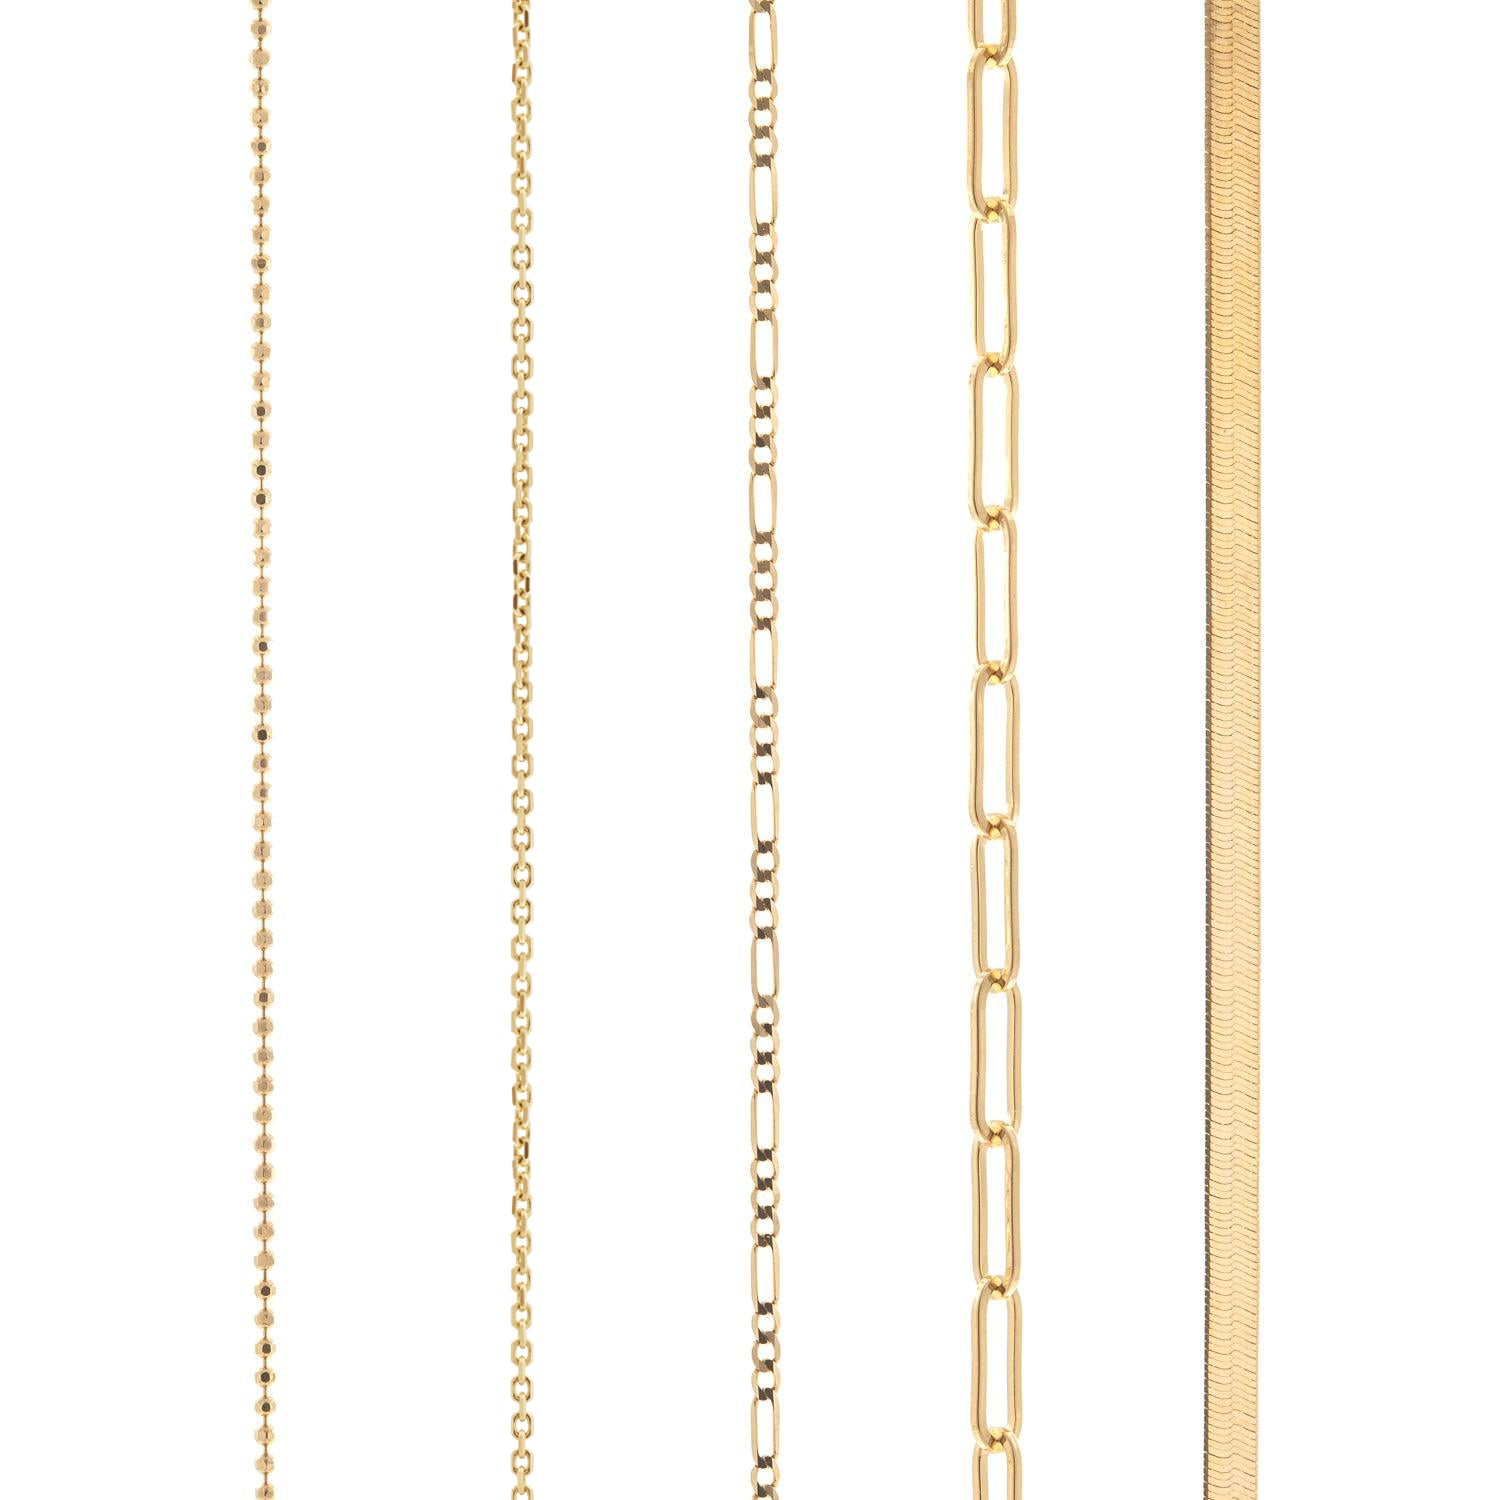 Cable Chain - 14k Gold